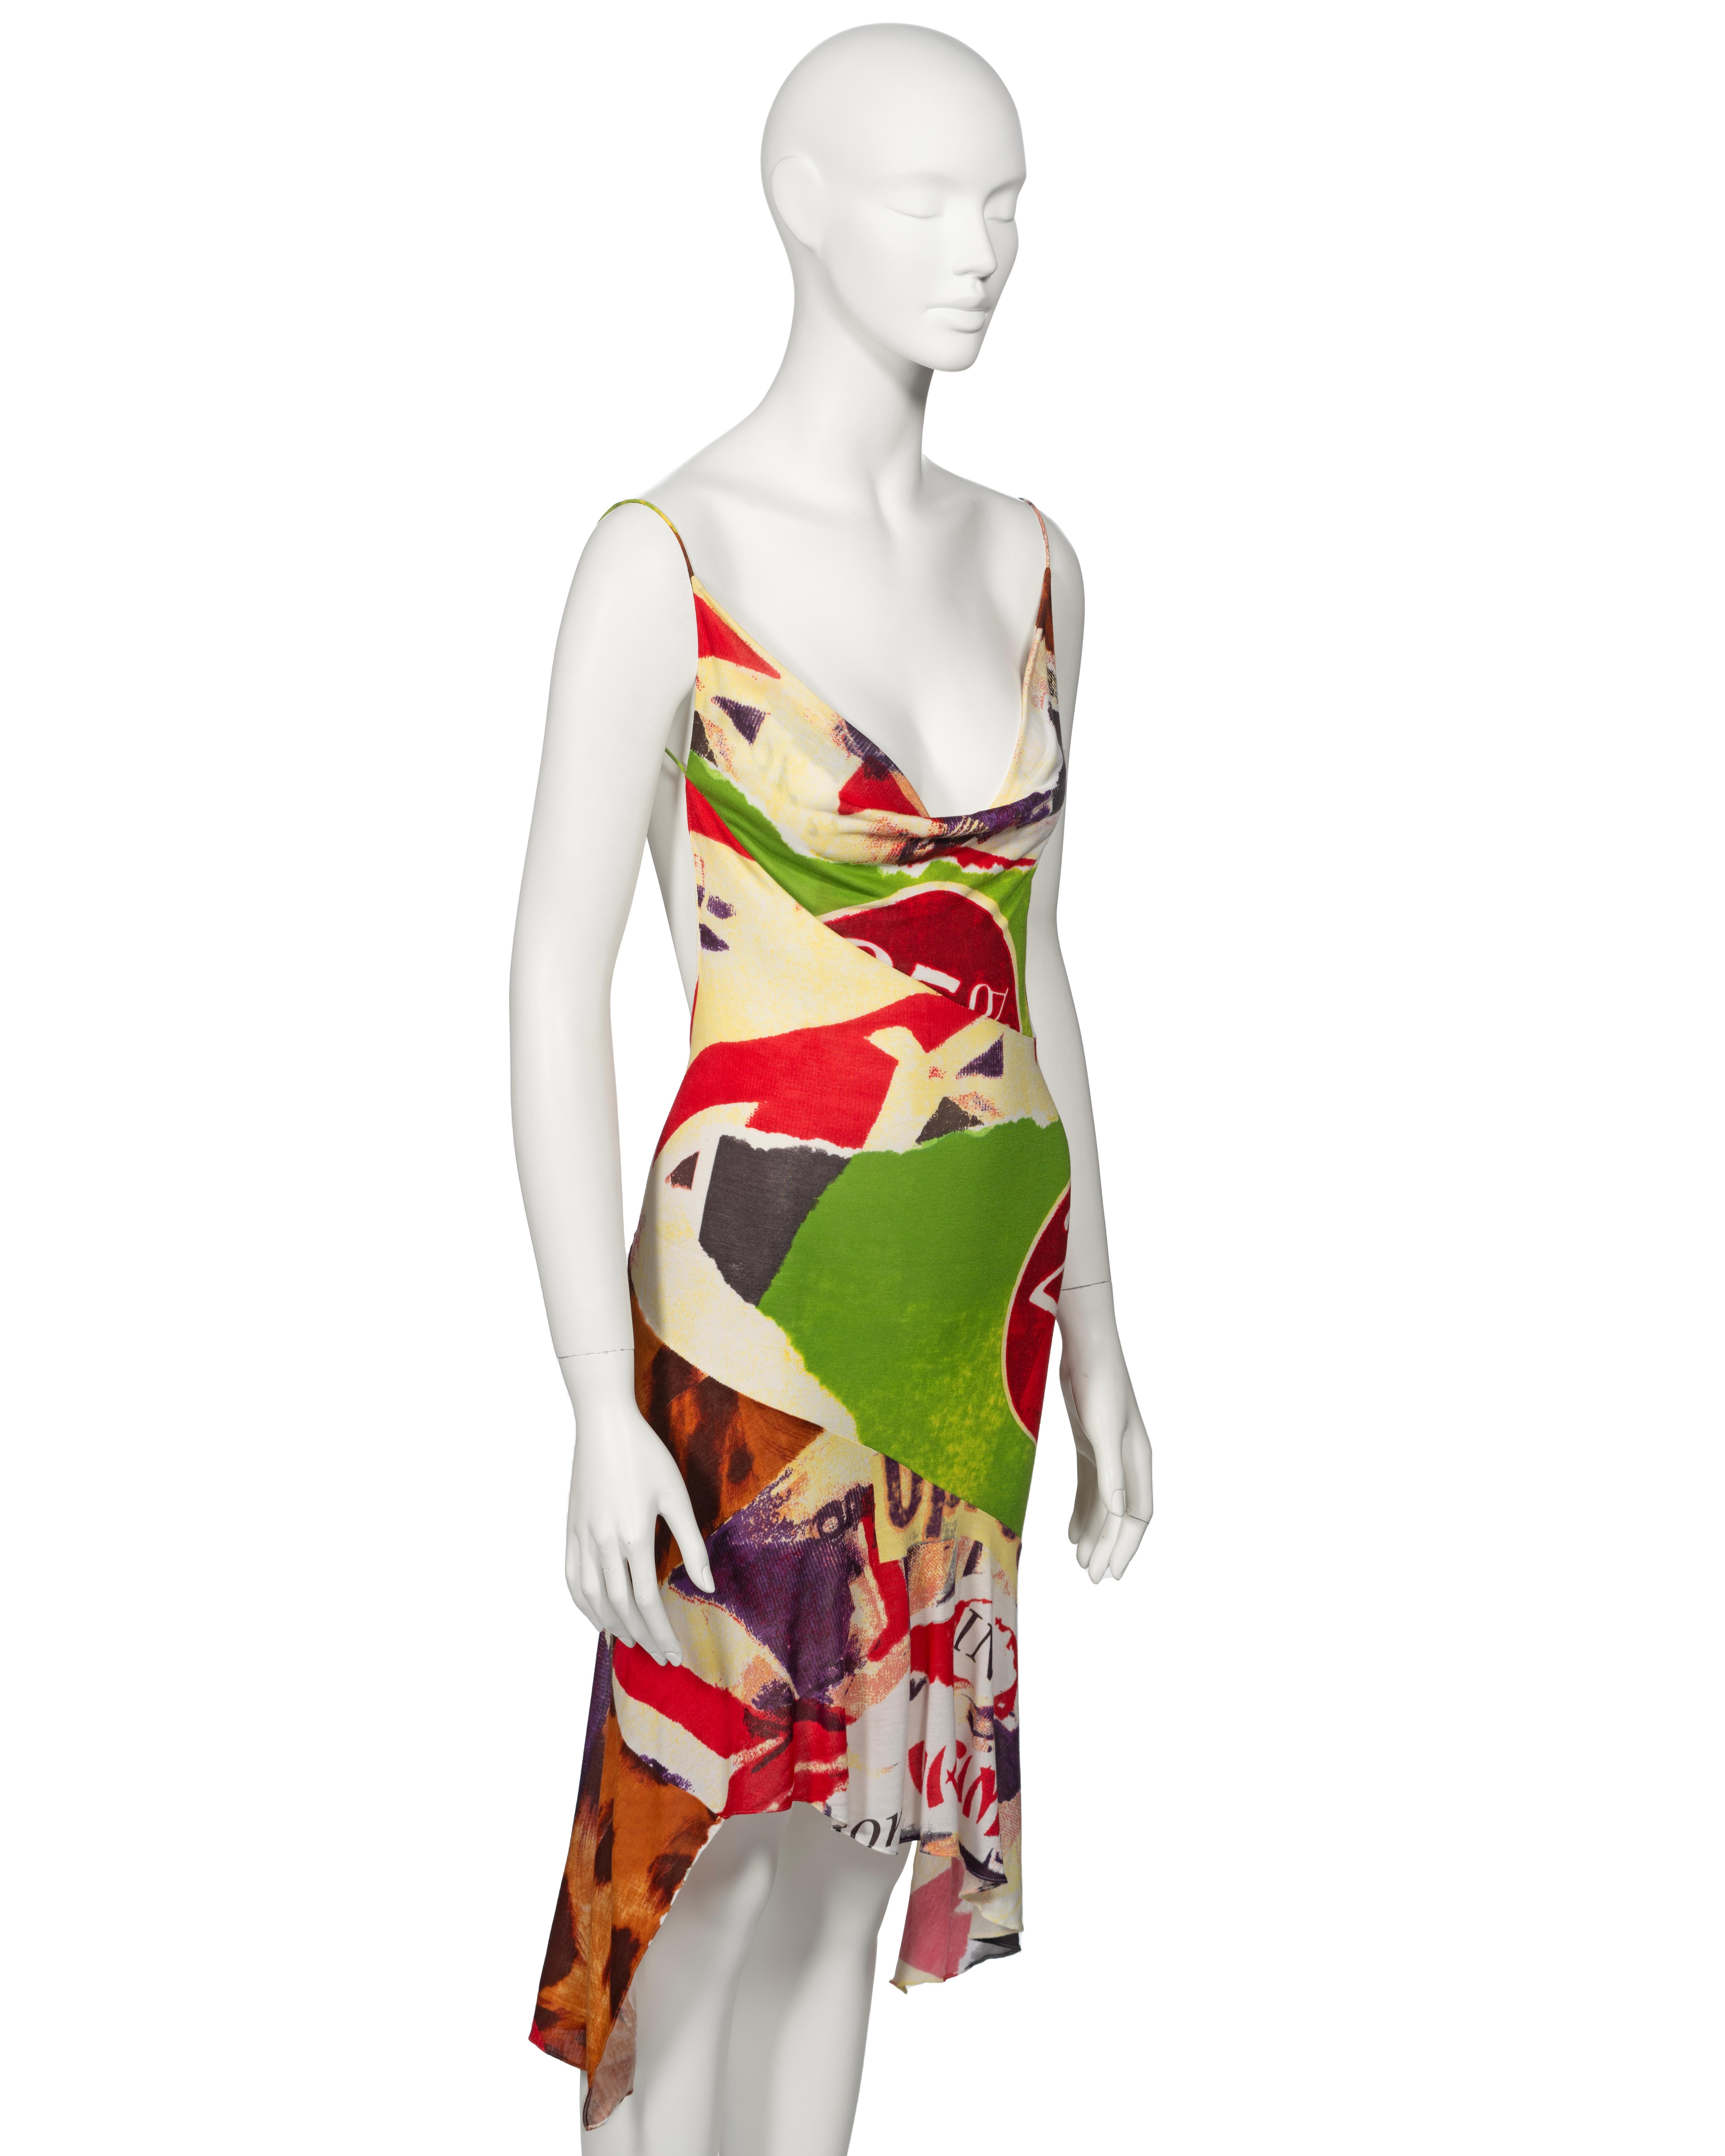 Women's Christian Dior by John Galliano Montage Print Silk Jersey Dress, ss 2003 For Sale